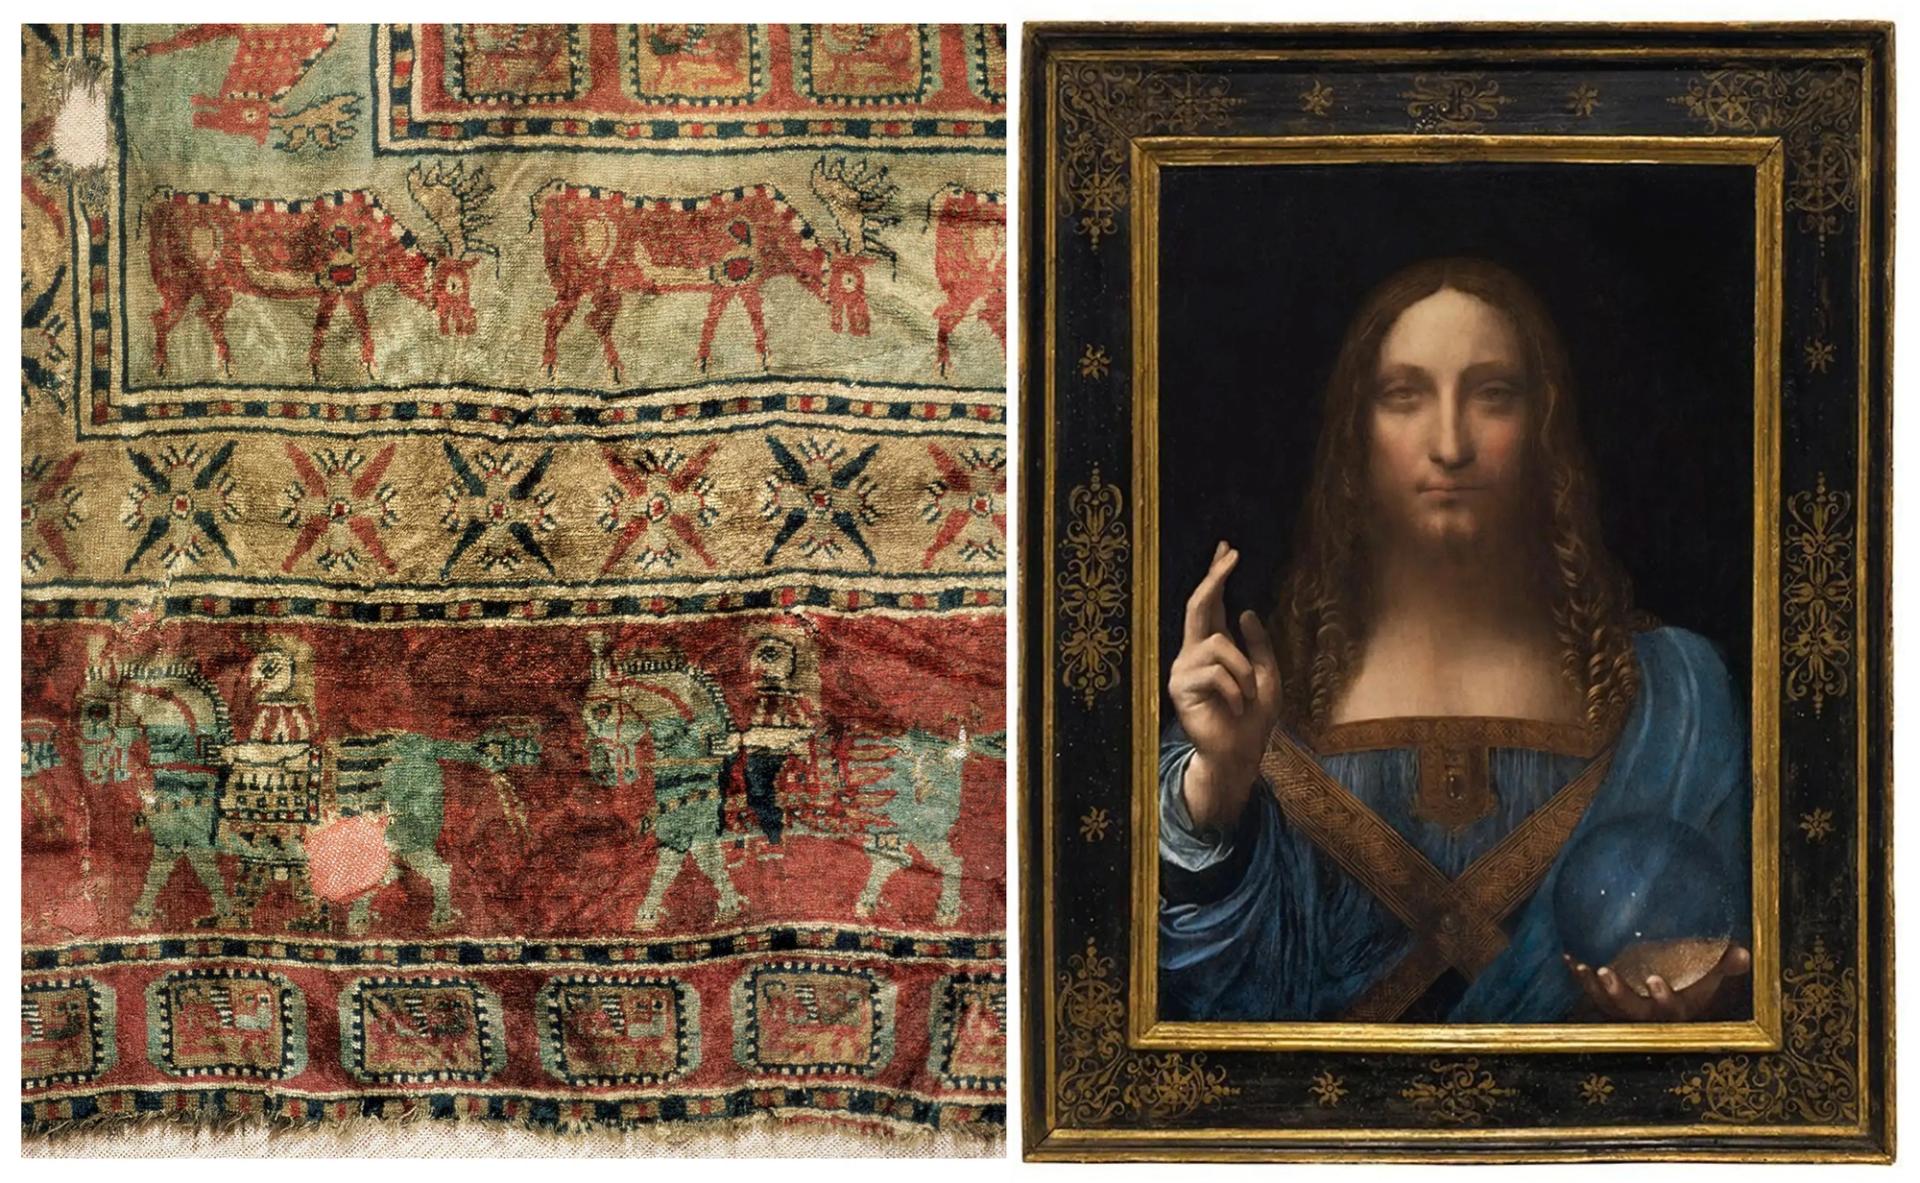 A detail from the Pazyryk rug (left), one of the oldest carpets in the world, dating from around the 4th–3rd centuries BC, in the collection of the Hermitage Museum, St Petersburg. A shared expertise in historic carpets gave the respected carpet dealer Michael Franses an entrée to offer the Salvator Mundi (right) to the museum's director, Mikhail Piotrovsky State Hermitage Museum, St Petersburg. Album/Alamy Stock Photo